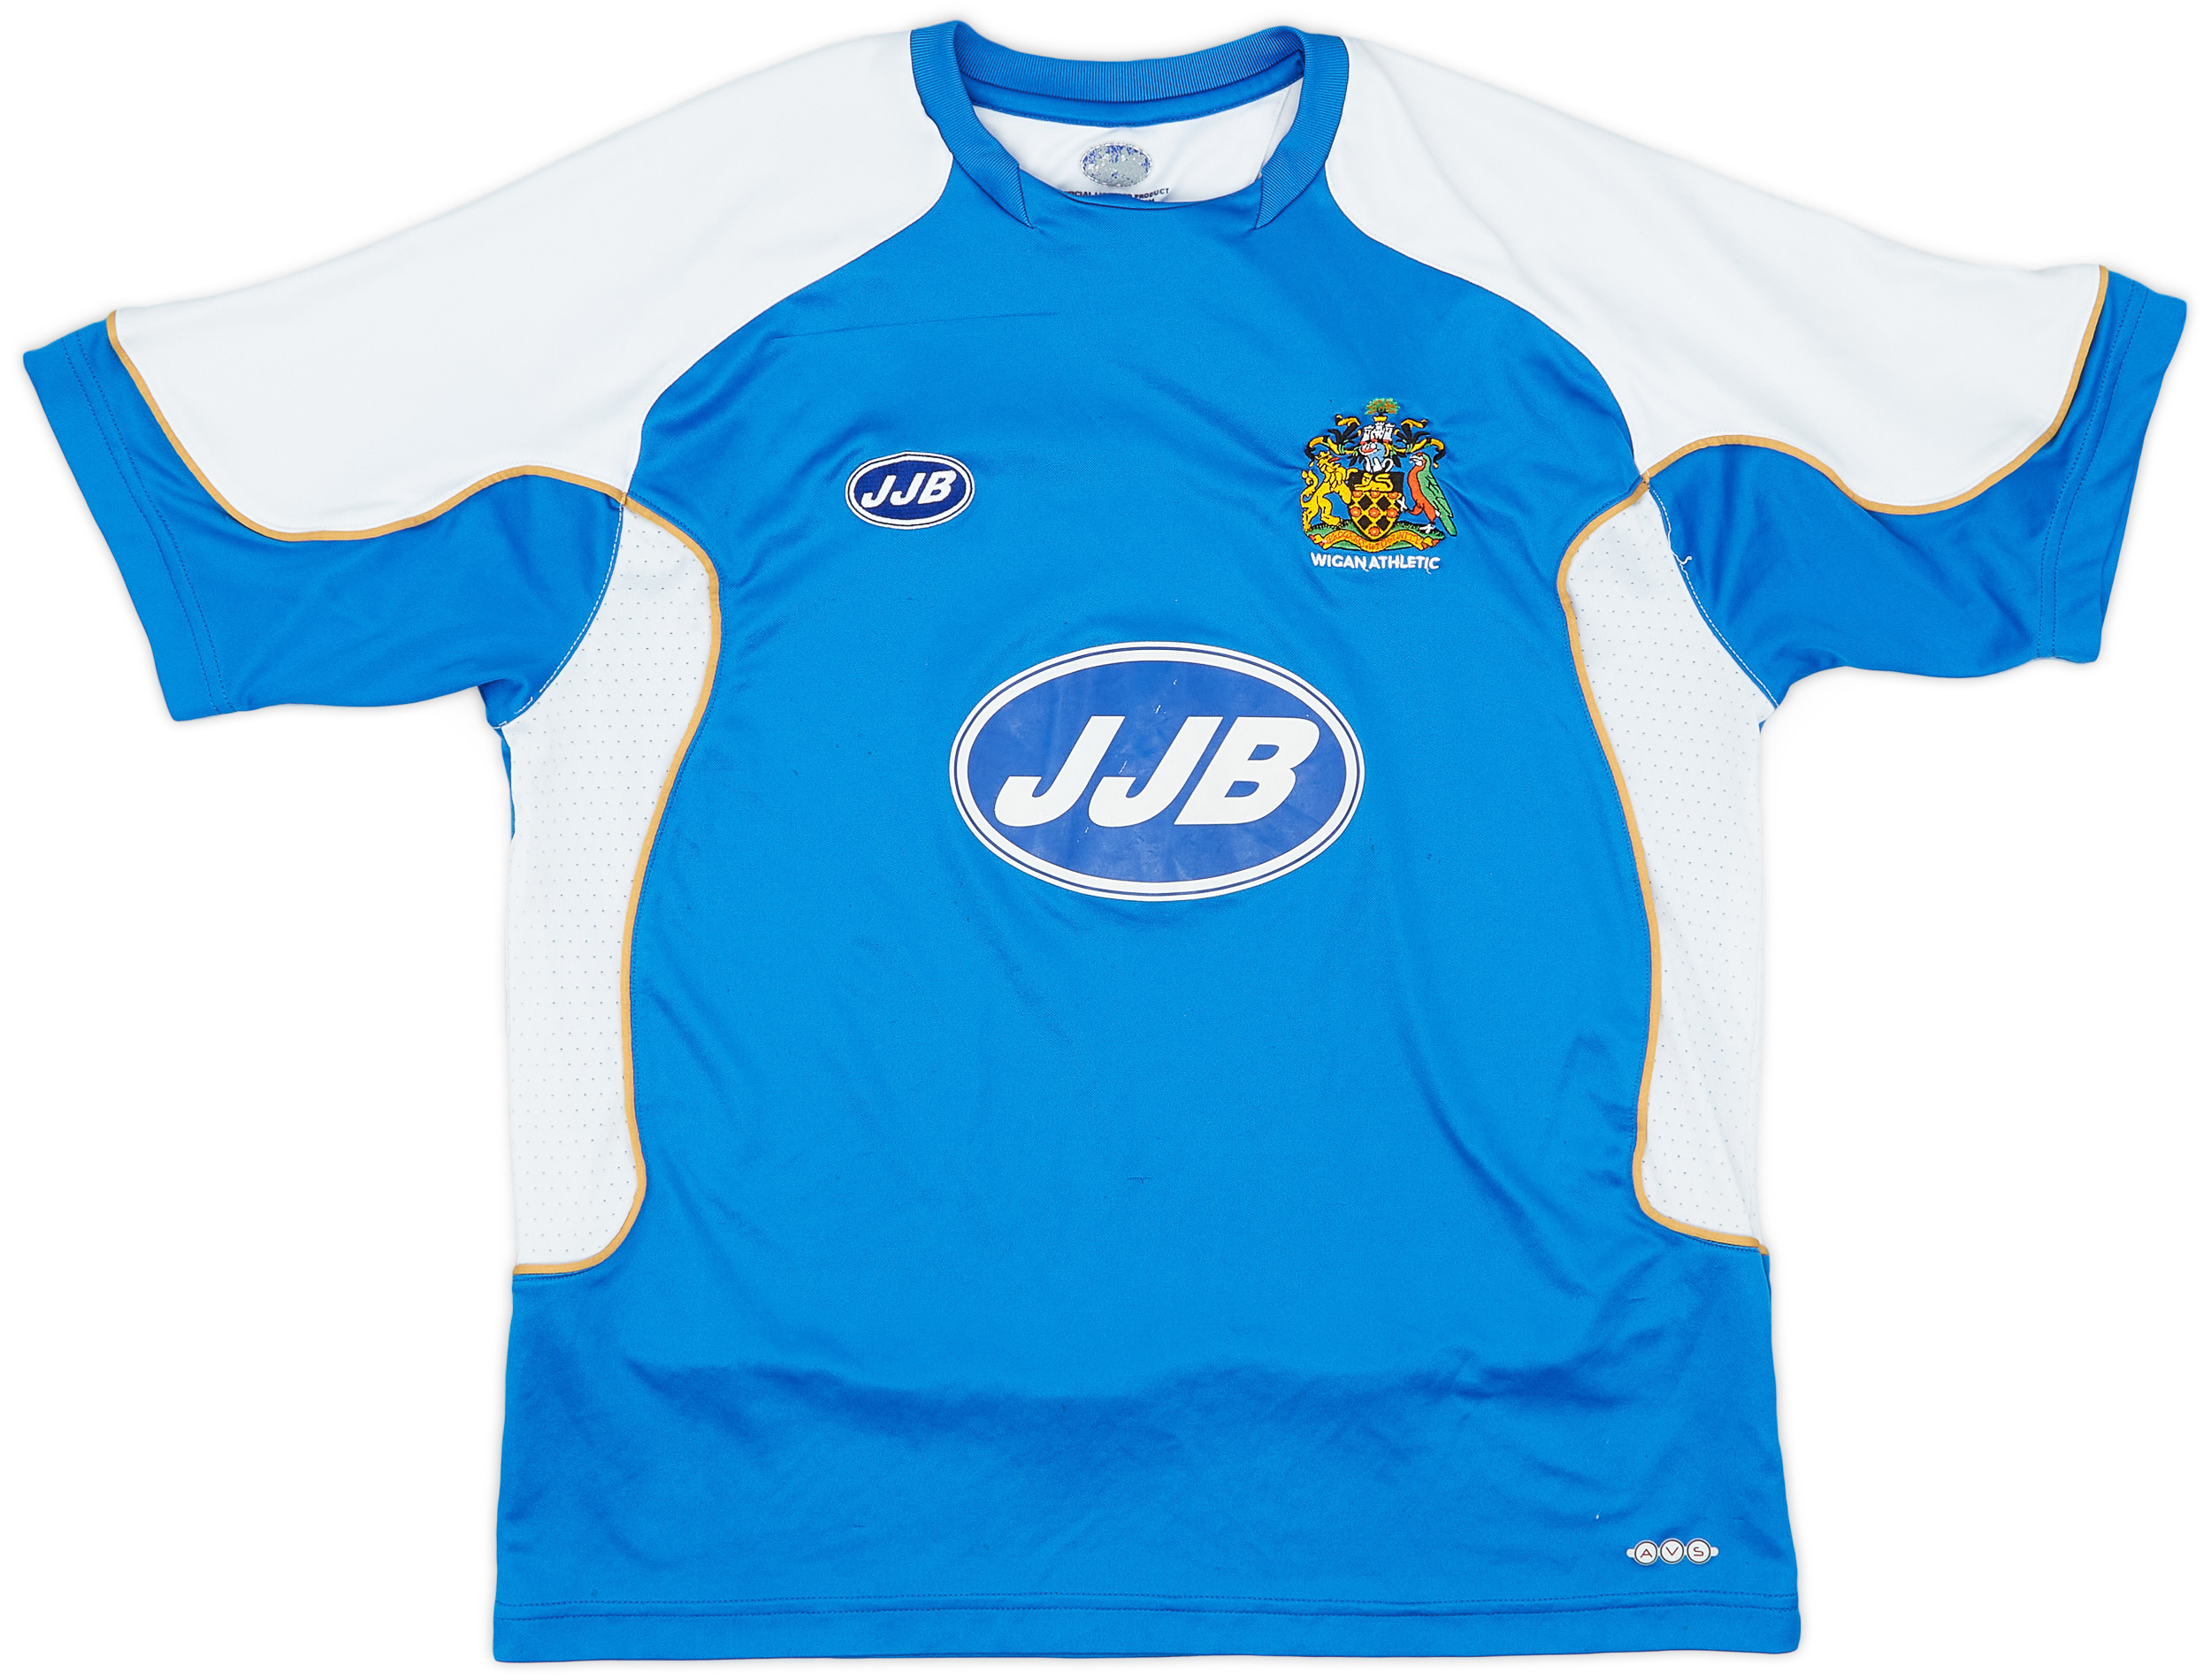 2006-07 Wigan Athletic Home Shirt - 7/10 - ()